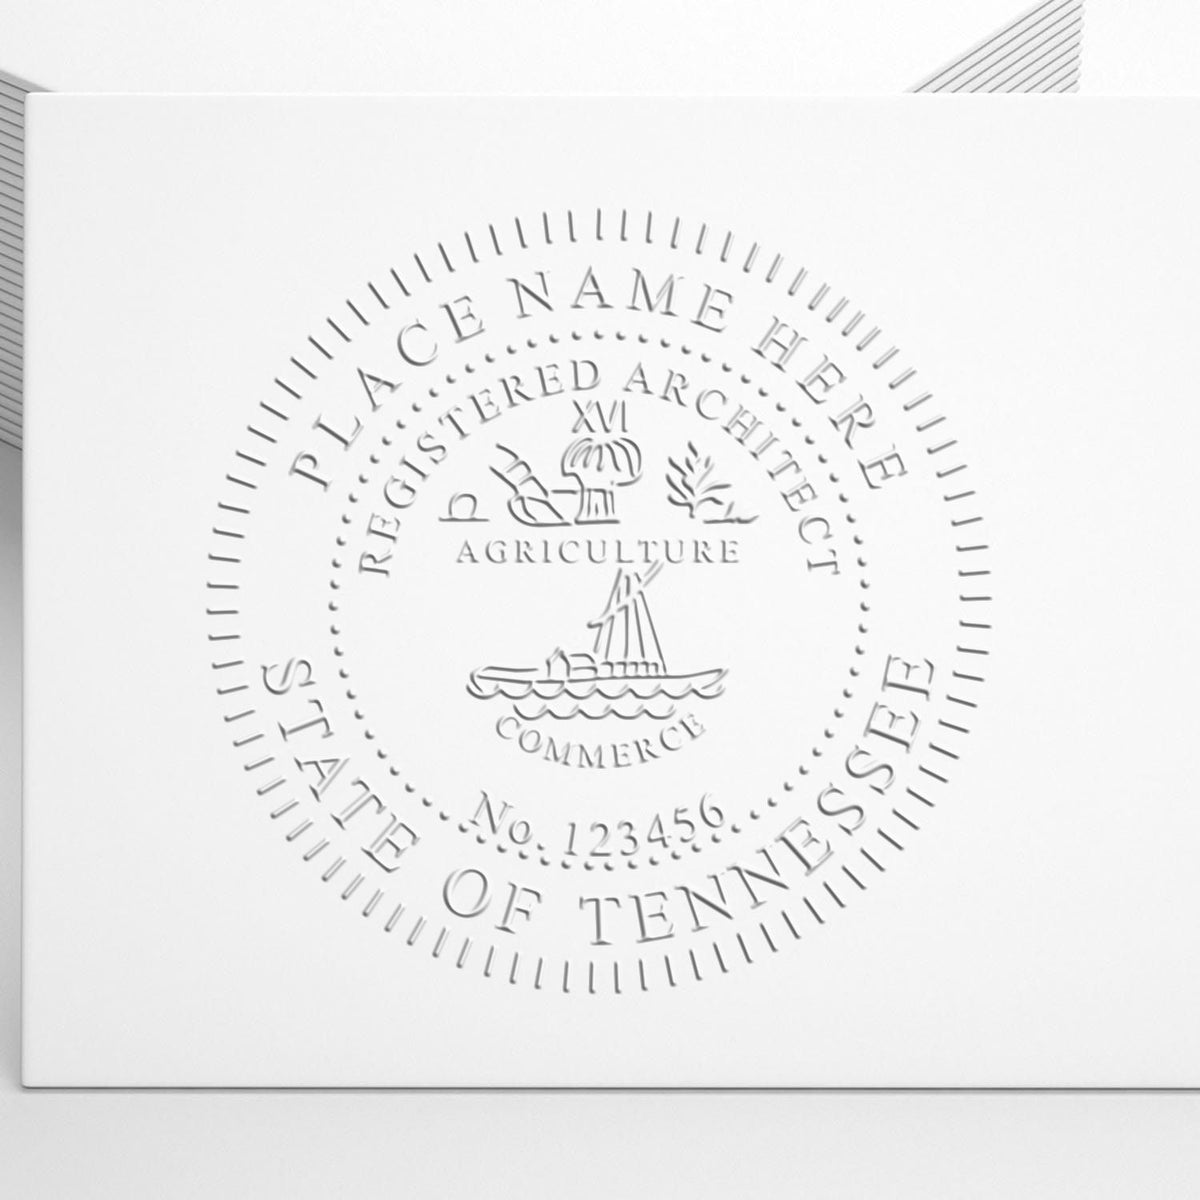 A photograph of the Hybrid Tennessee Architect Seal stamp impression reveals a vivid, professional image of the on paper.